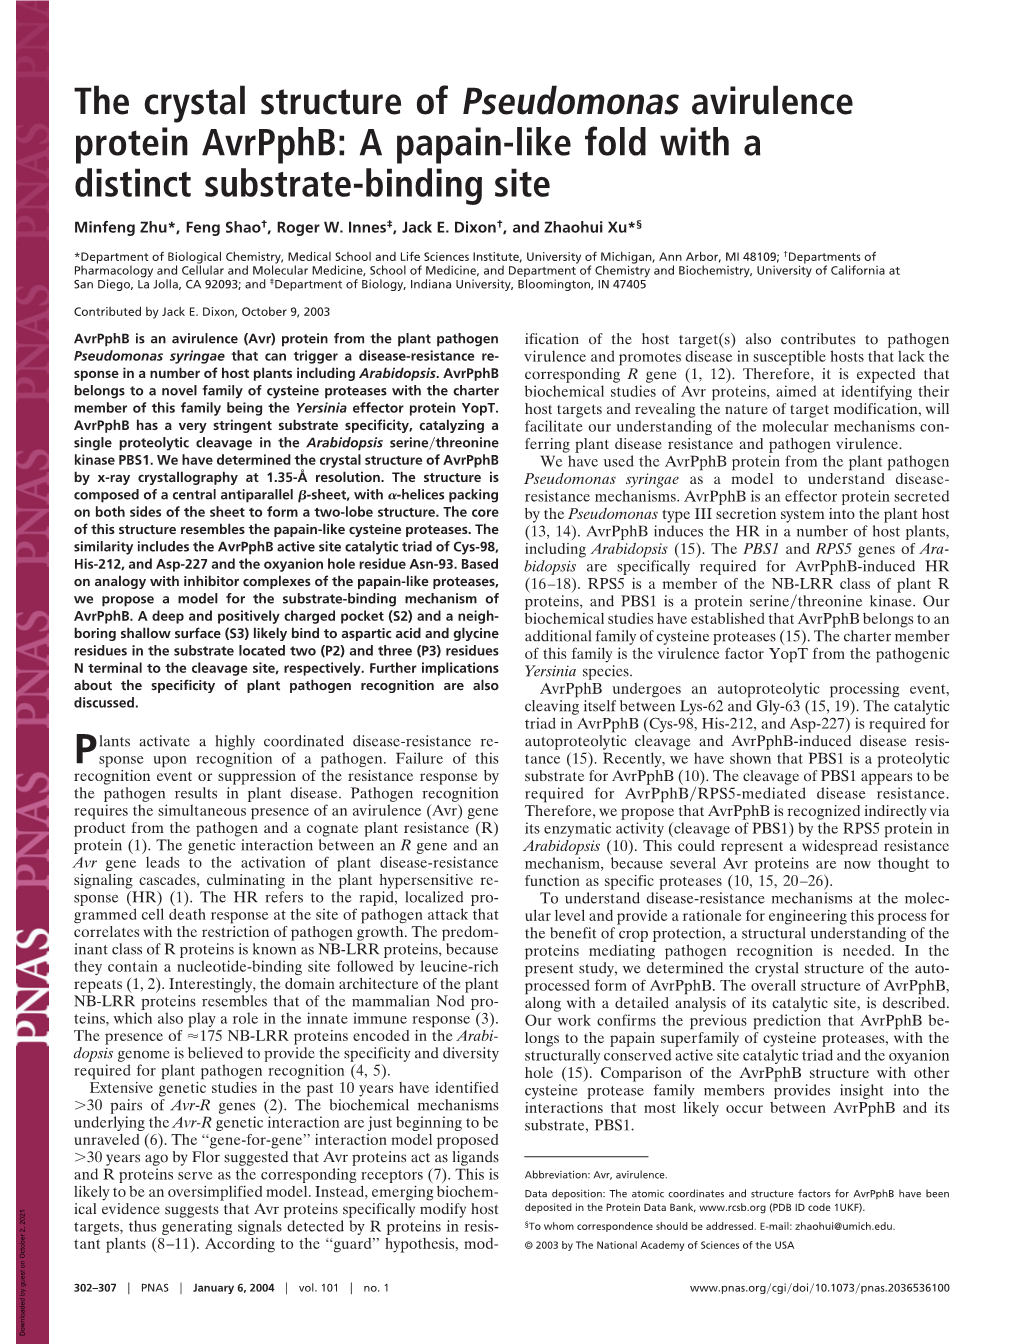 A Papain-Like Fold with a Distinct Substrate-Binding Site